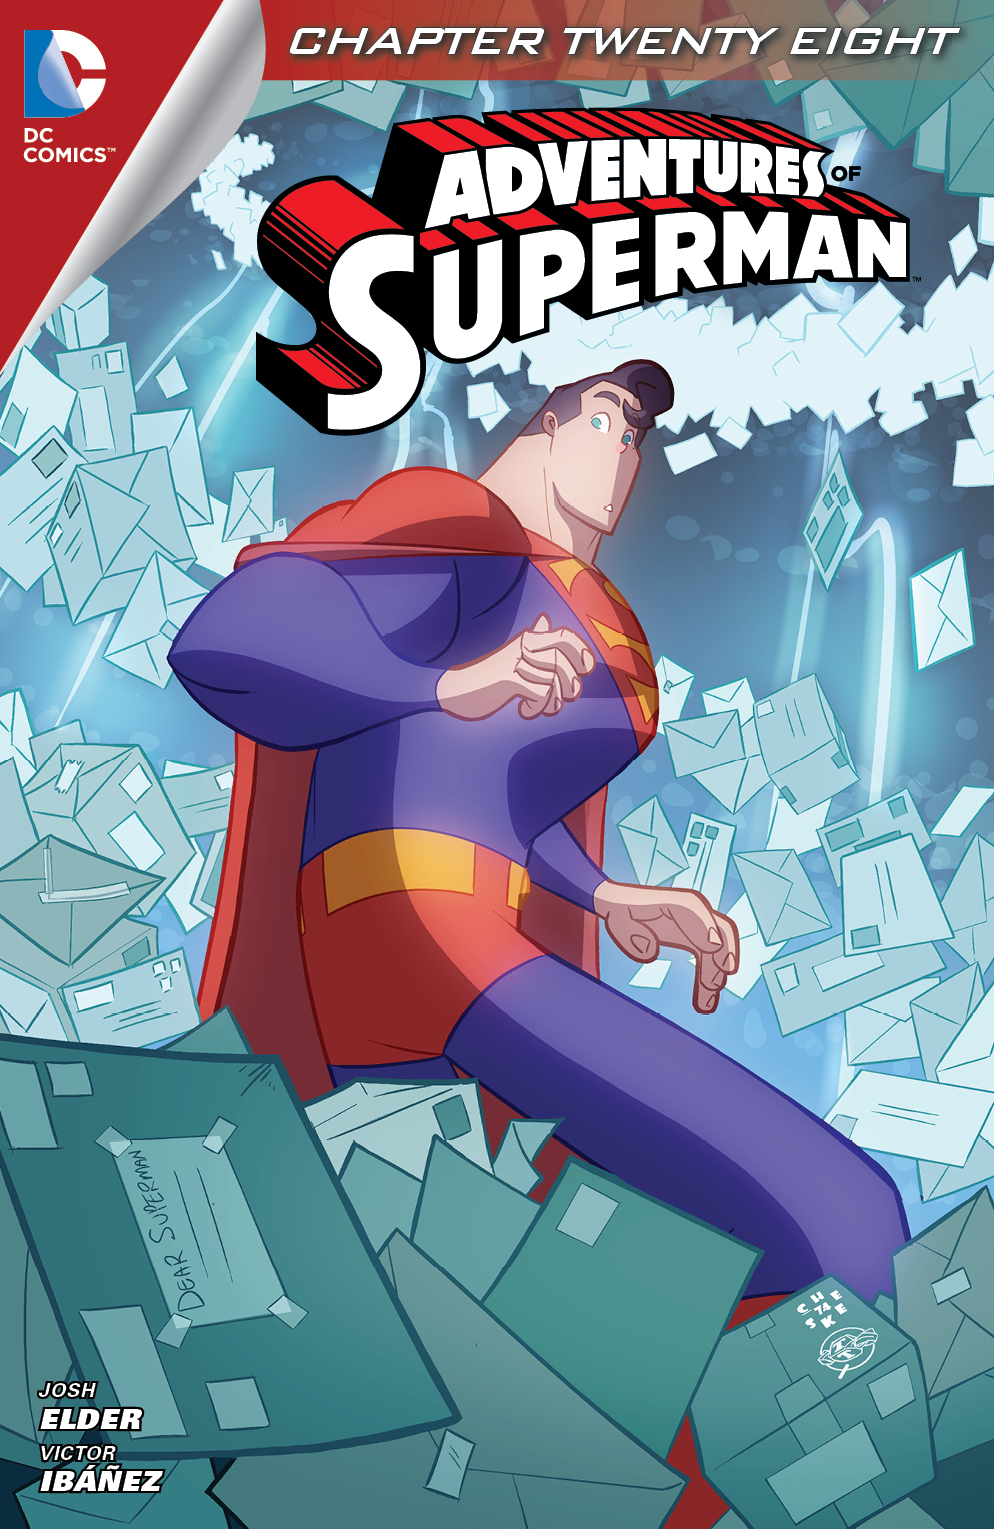 Adventures of Superman (2013-) #28 preview images